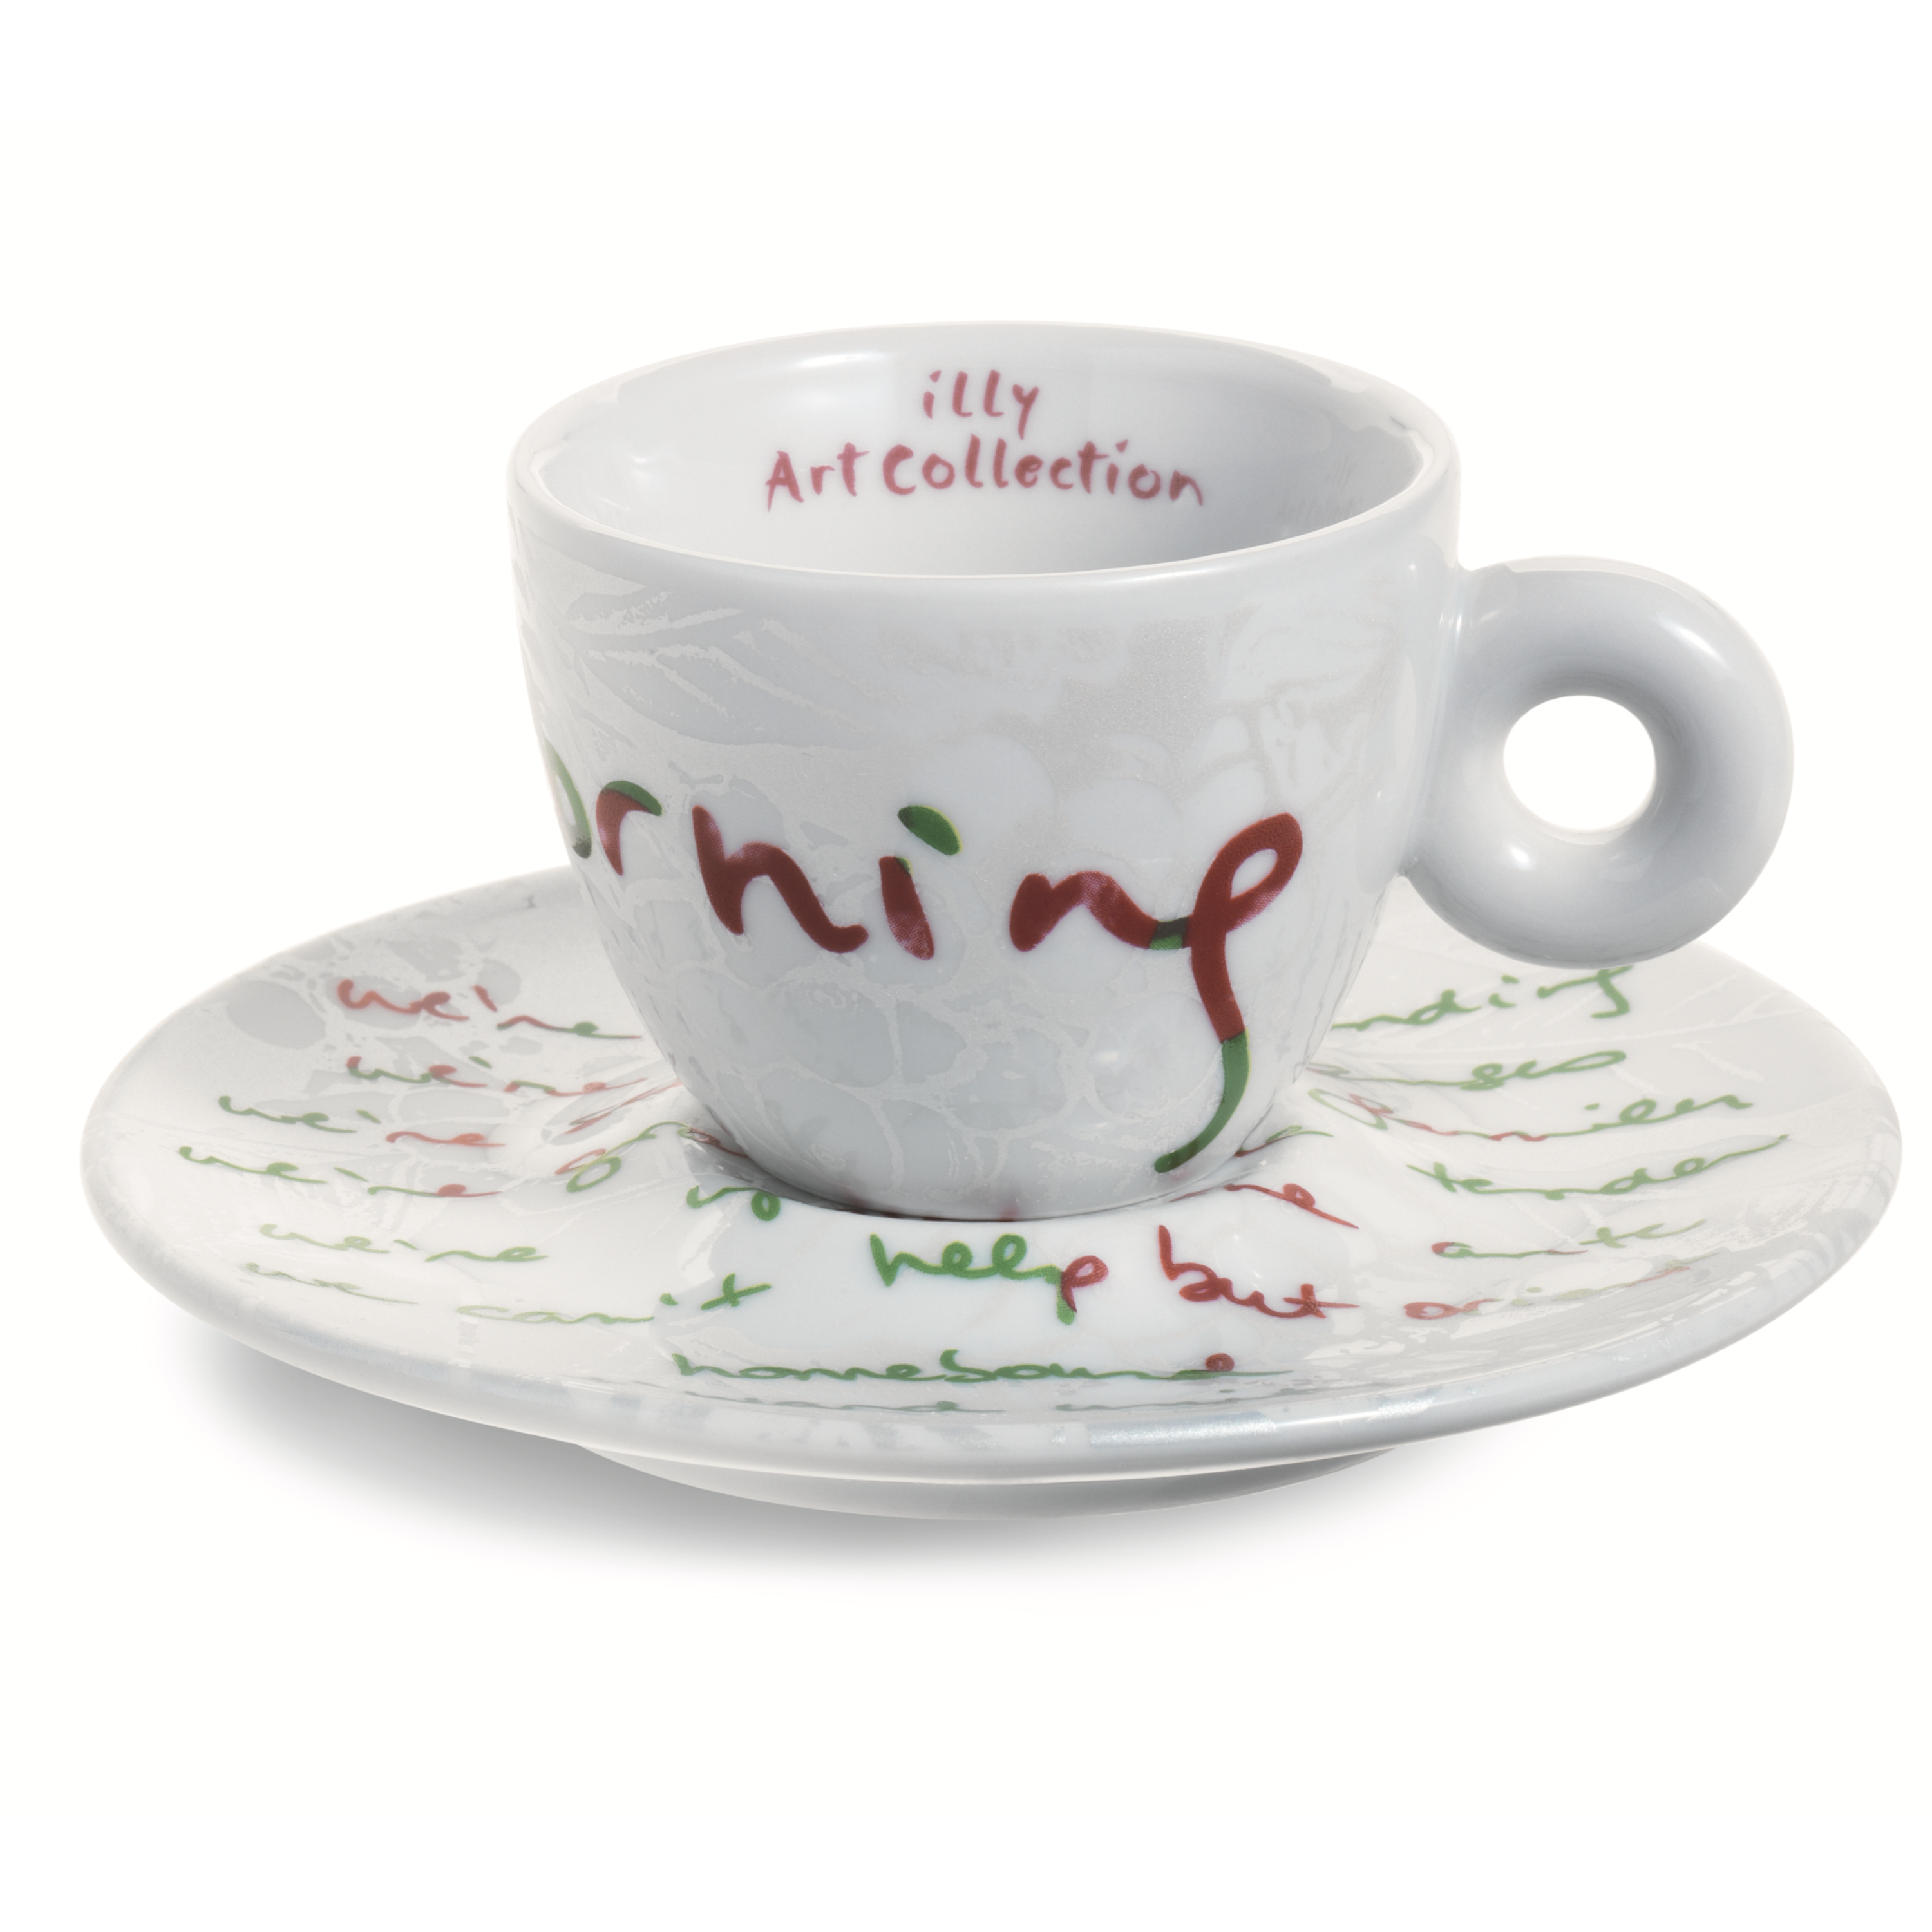 illy Art Collection ALANIS MORISSETTE Gift Set 2 Espresso Cups + 250gr illy Espresso Ground + DVD, Cups, 02-02-6024